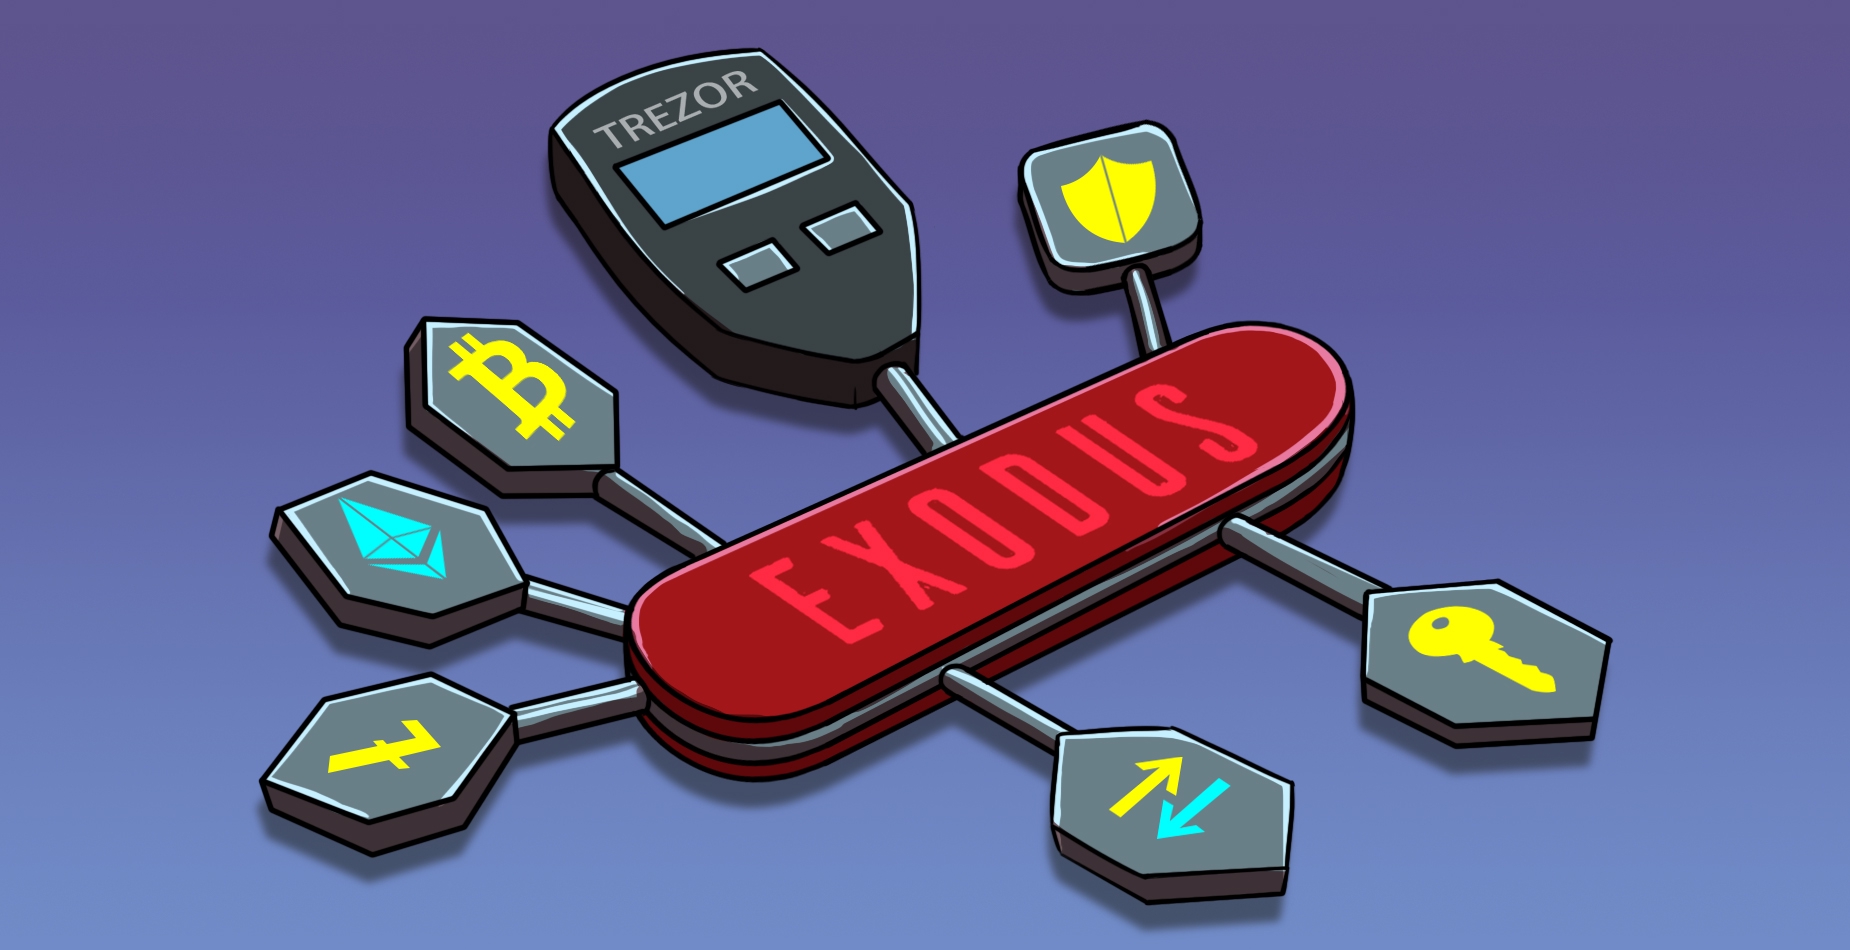 The advantages and features displayed as the elements of a swiss knife, featuring a trezor connected to it.